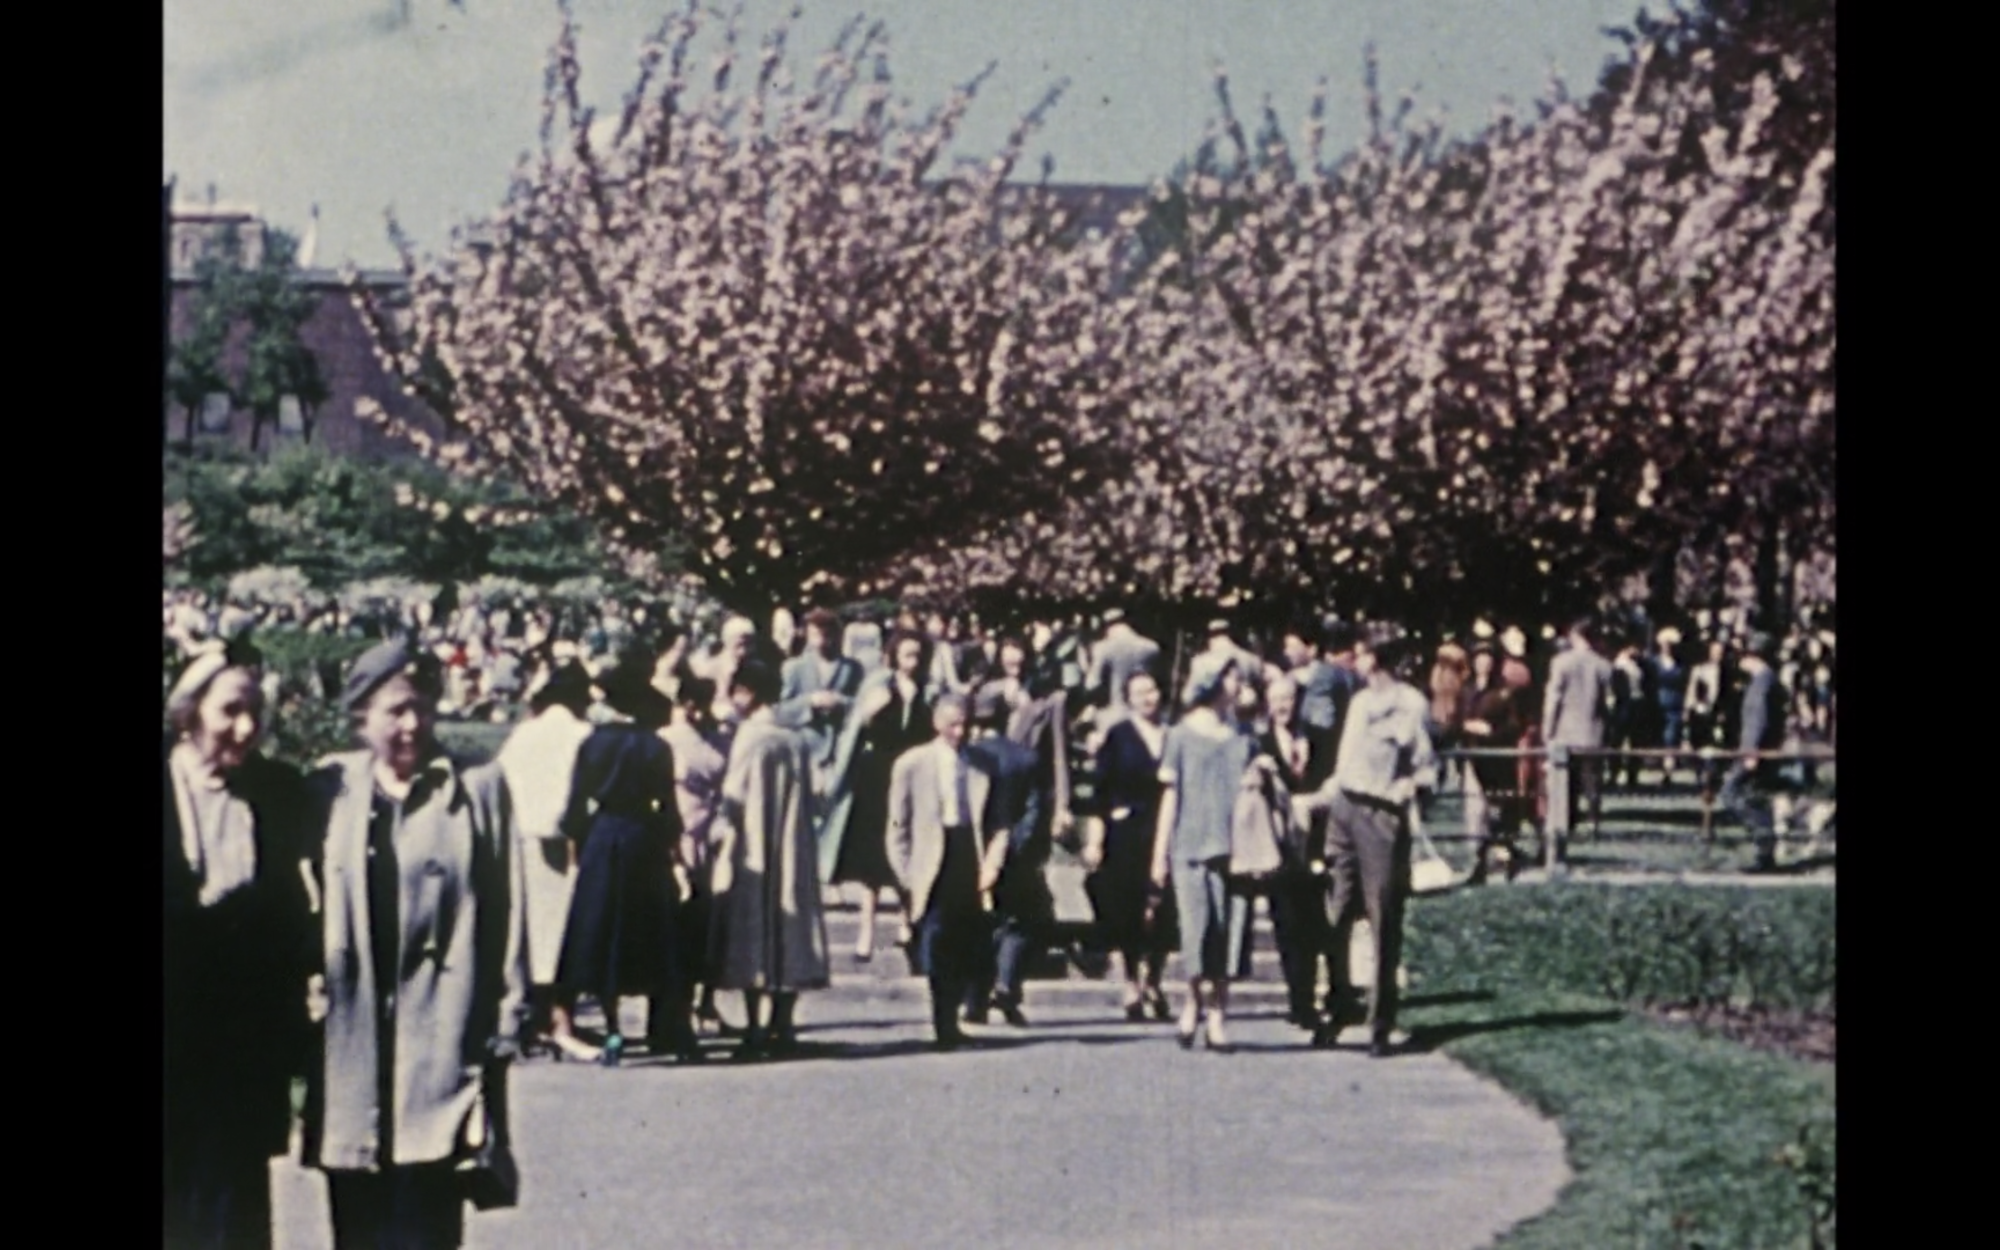 Screenshot from film Lost,Lost,Lost displaying people walking through a park